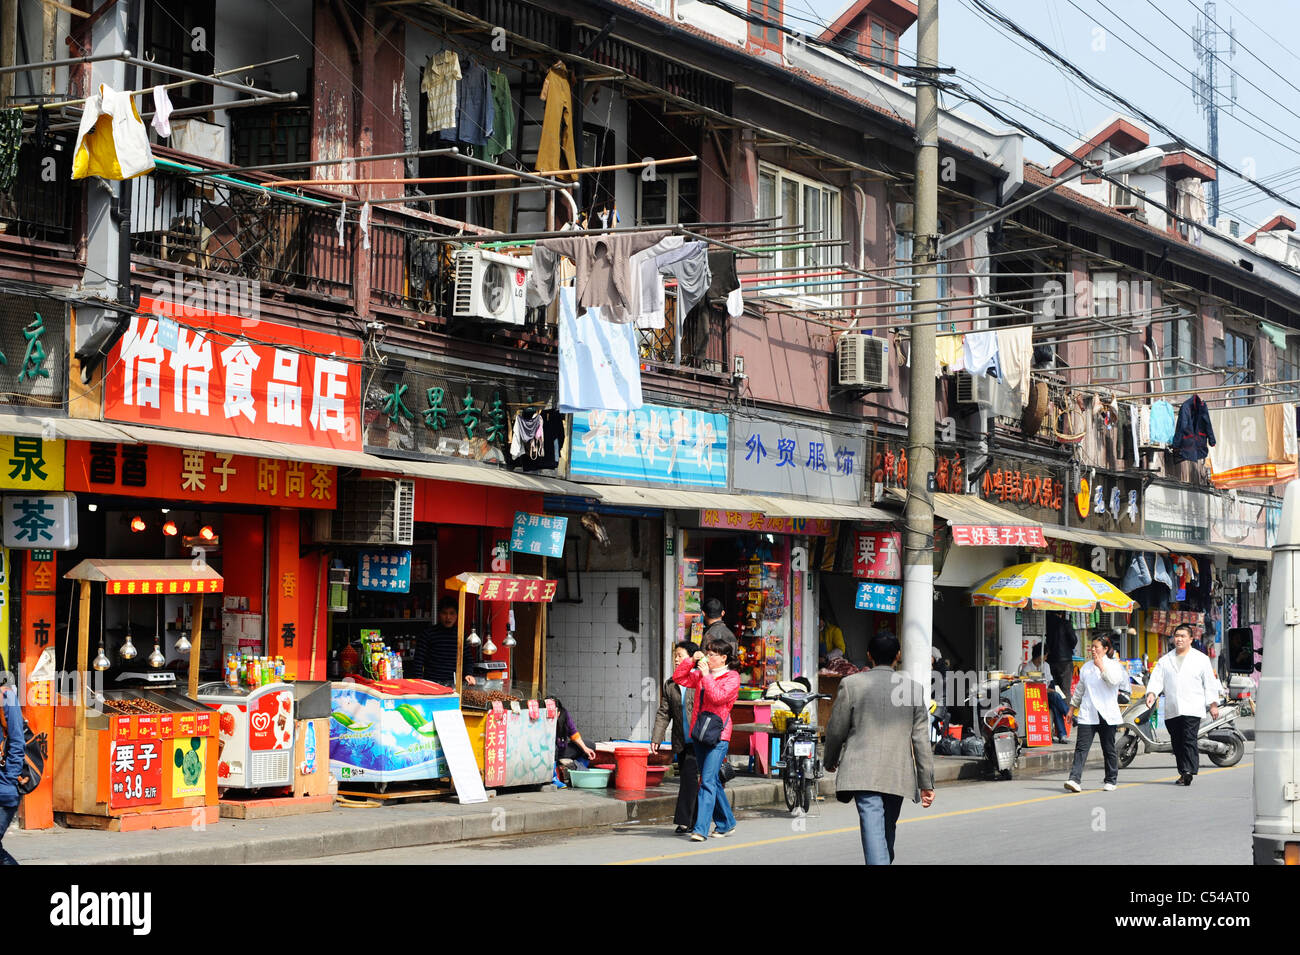 A typical street scene in old Shanghai Stock Photo